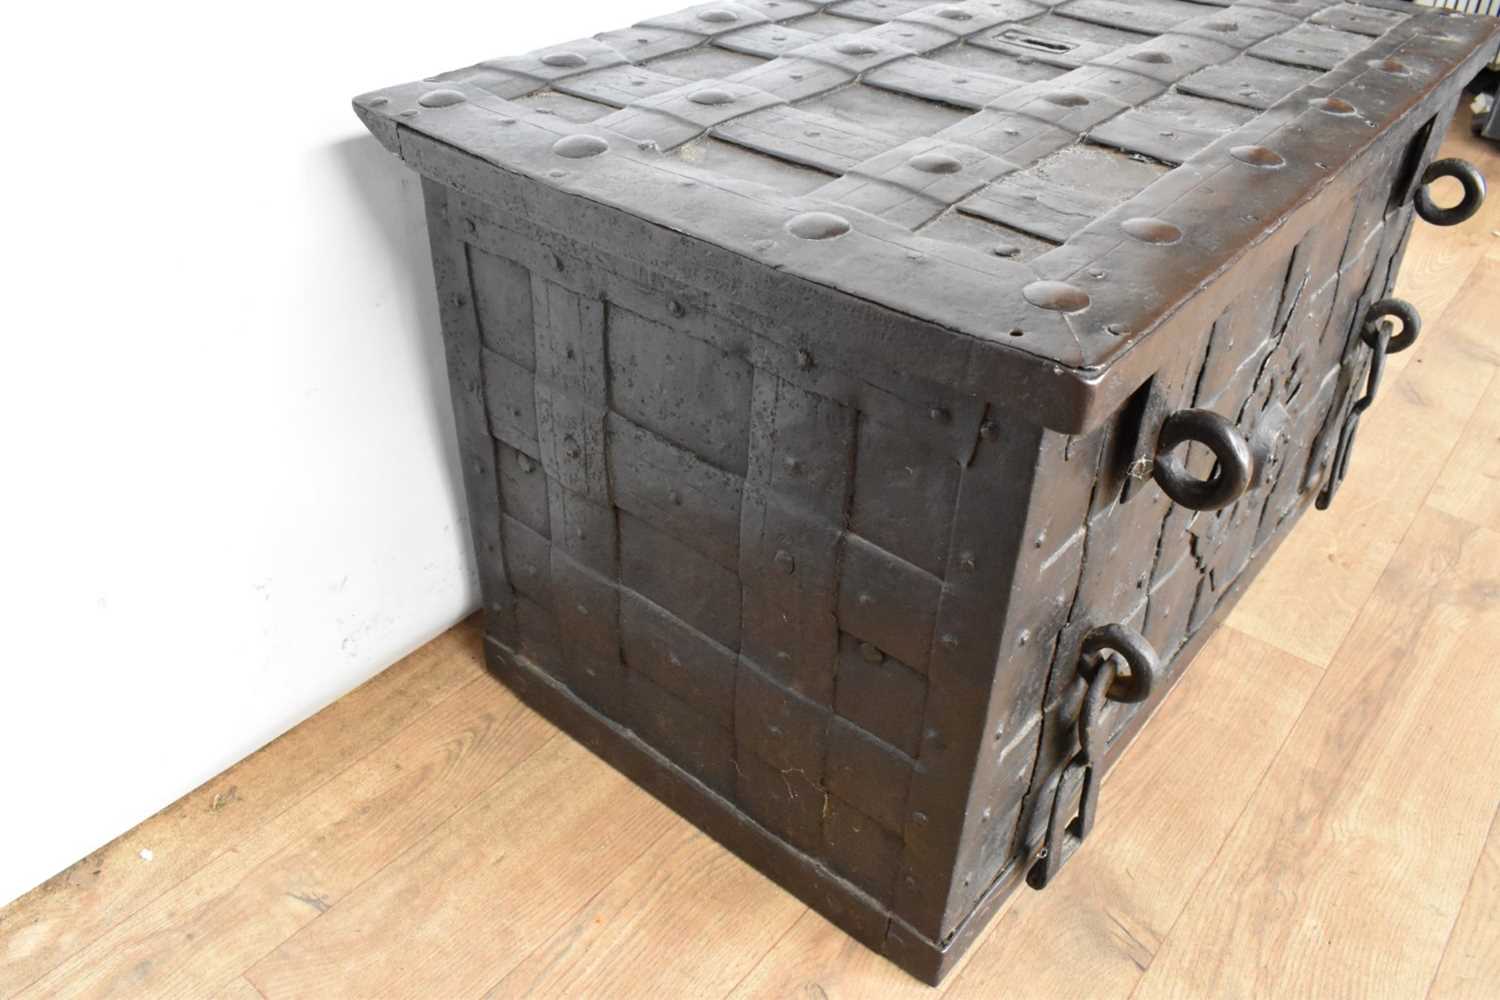 17th century German iron Armada chest with intricate locking system, key marked S. Morden - Image 7 of 23